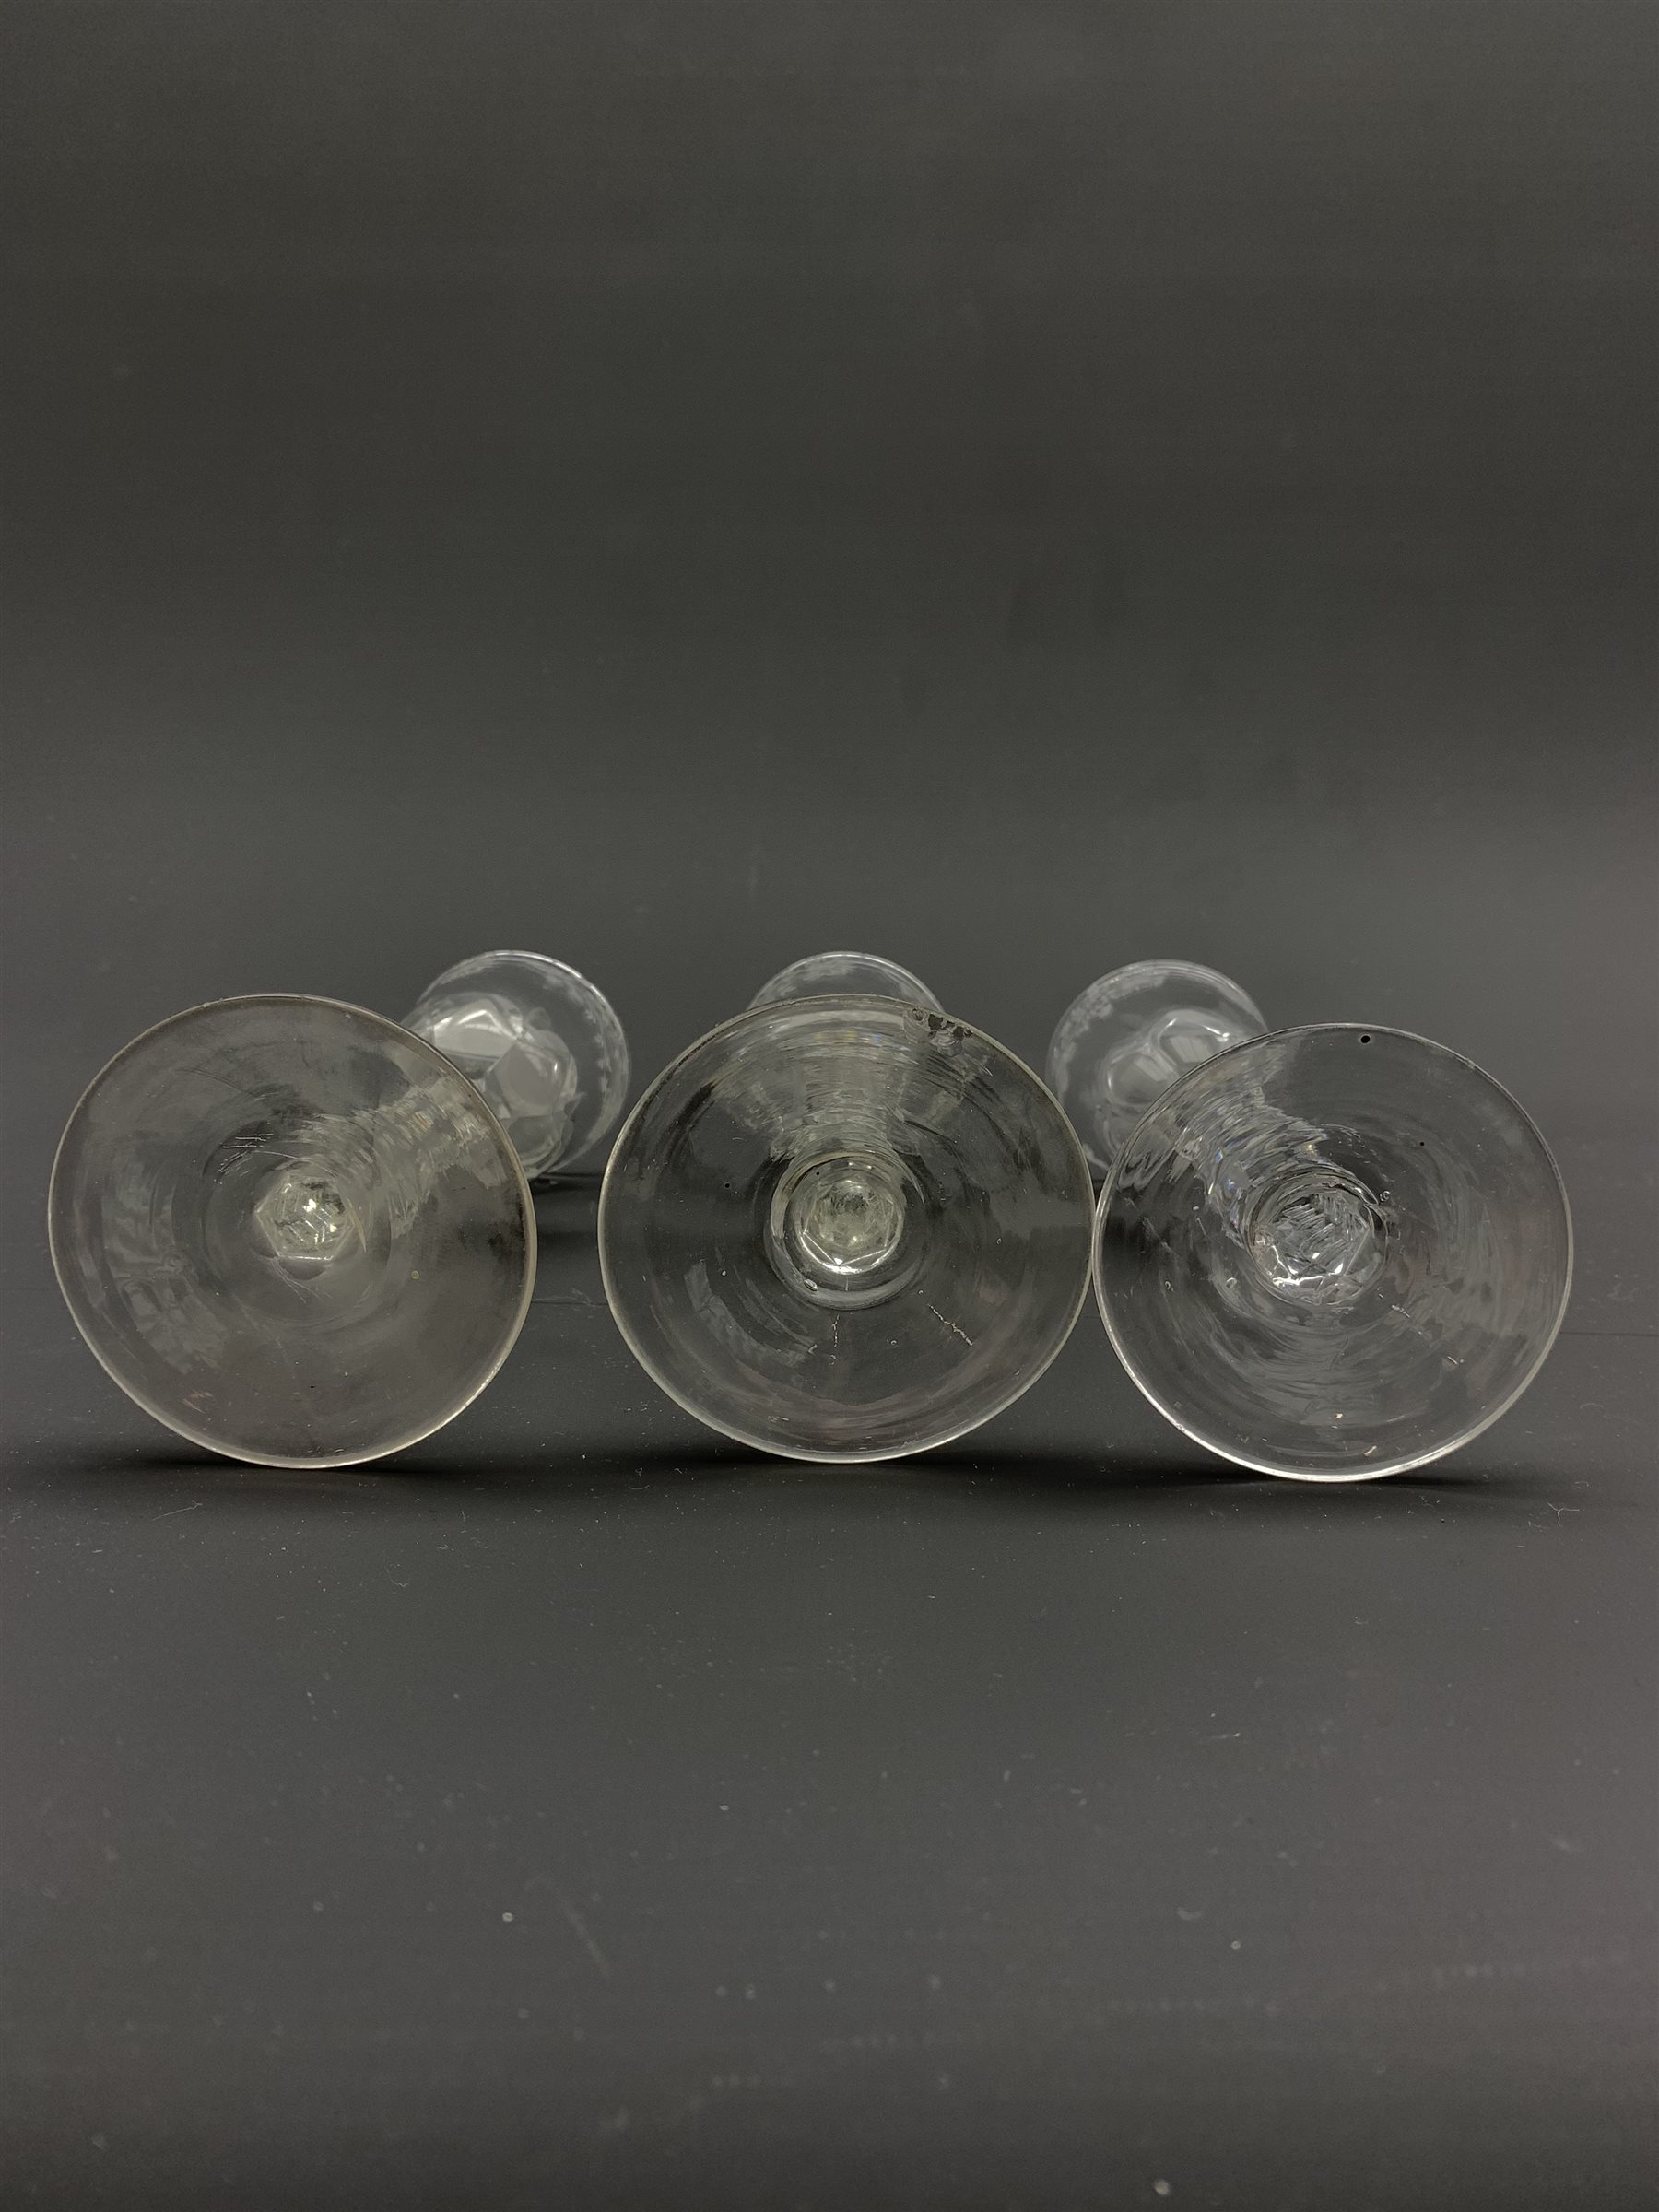 Set of three 18th century wine glasses, the ovoid bowls engraved with flower sprigs on faceted stems - Image 4 of 4